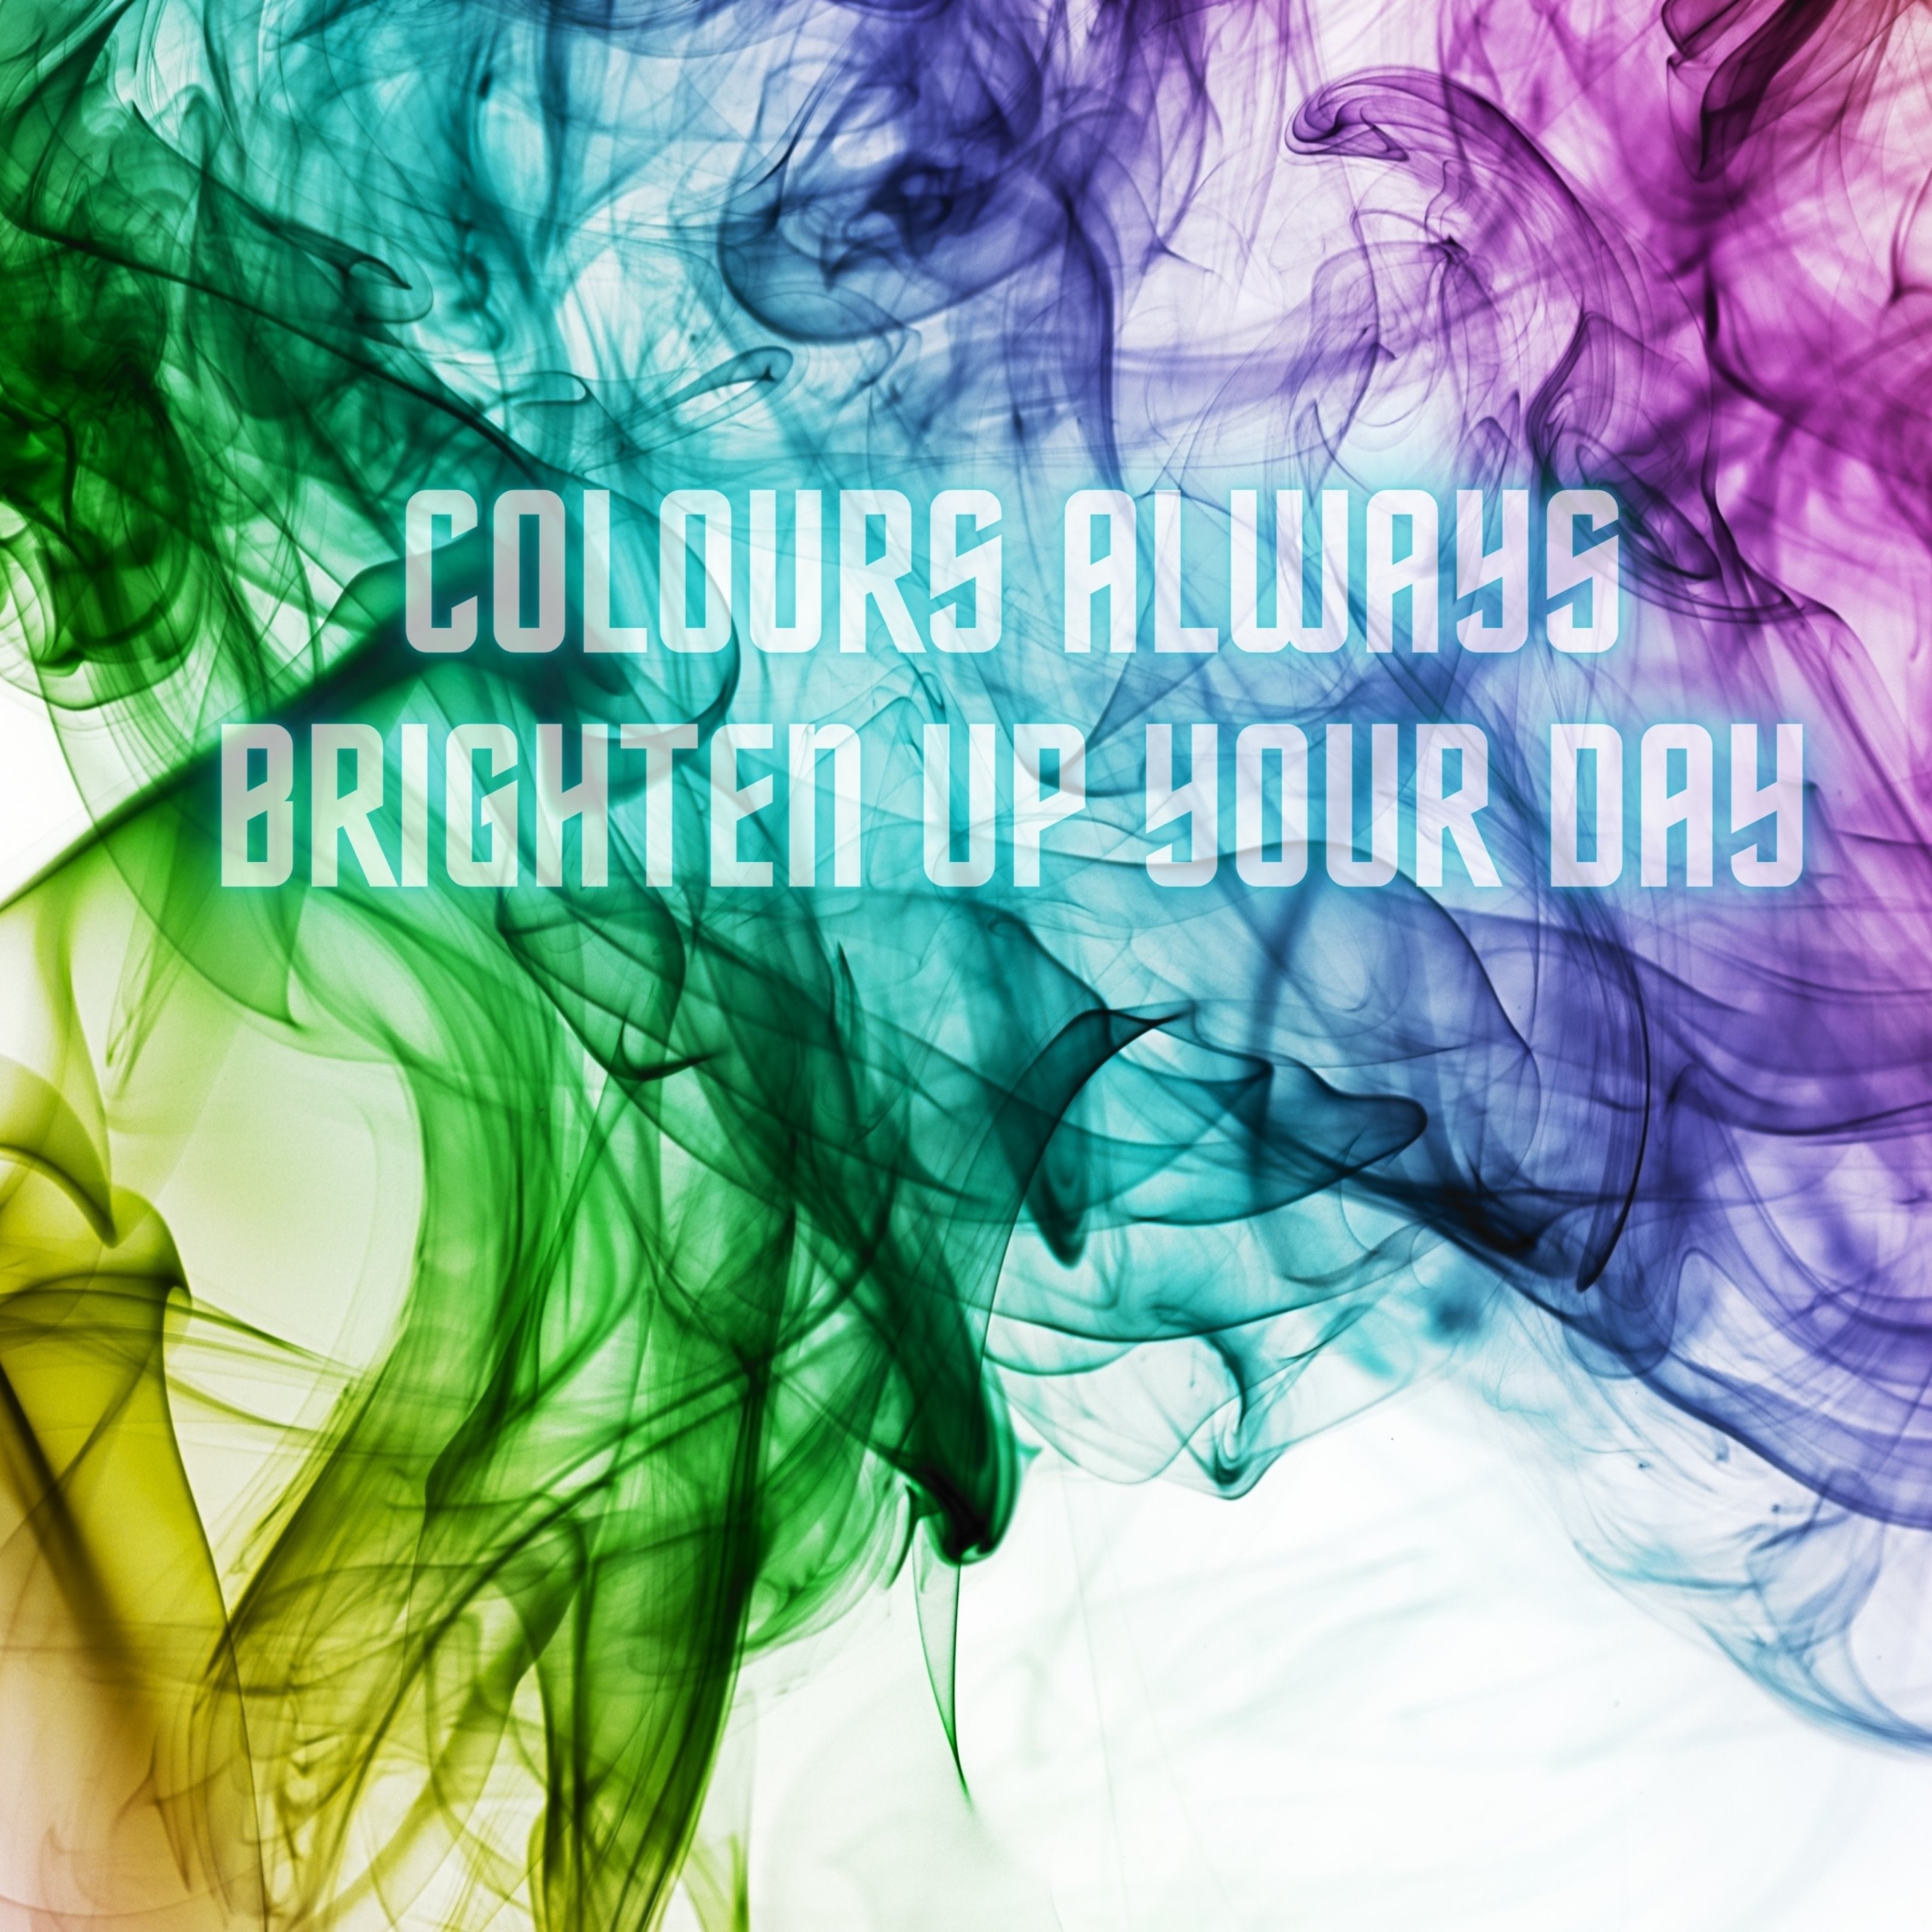 iPad Wallpapers Colourful Quote Ipad Wallpaper 3208x3208 px